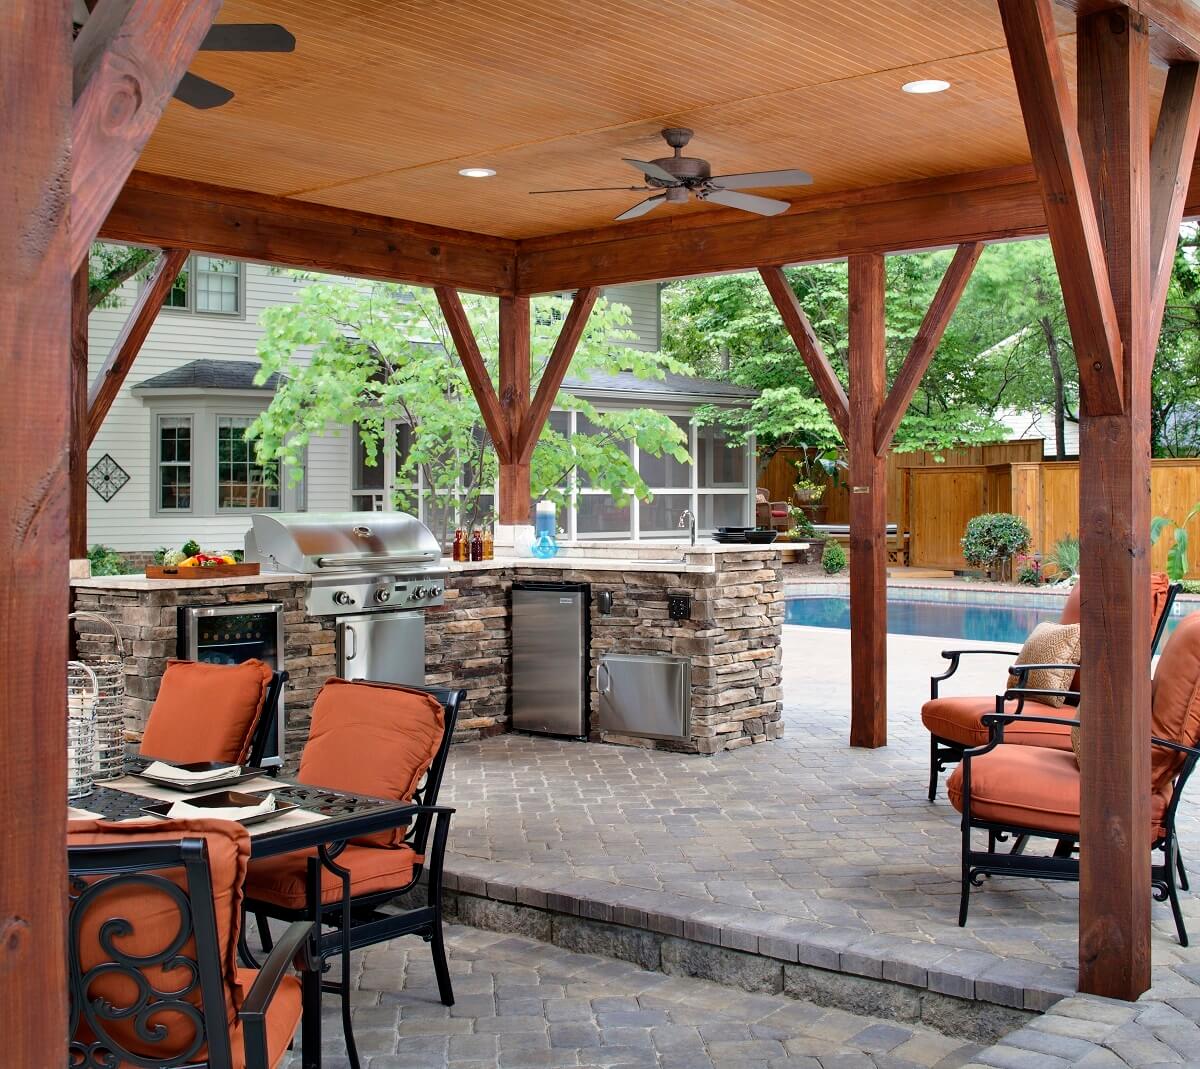 Outdoor kitchen under covered patio